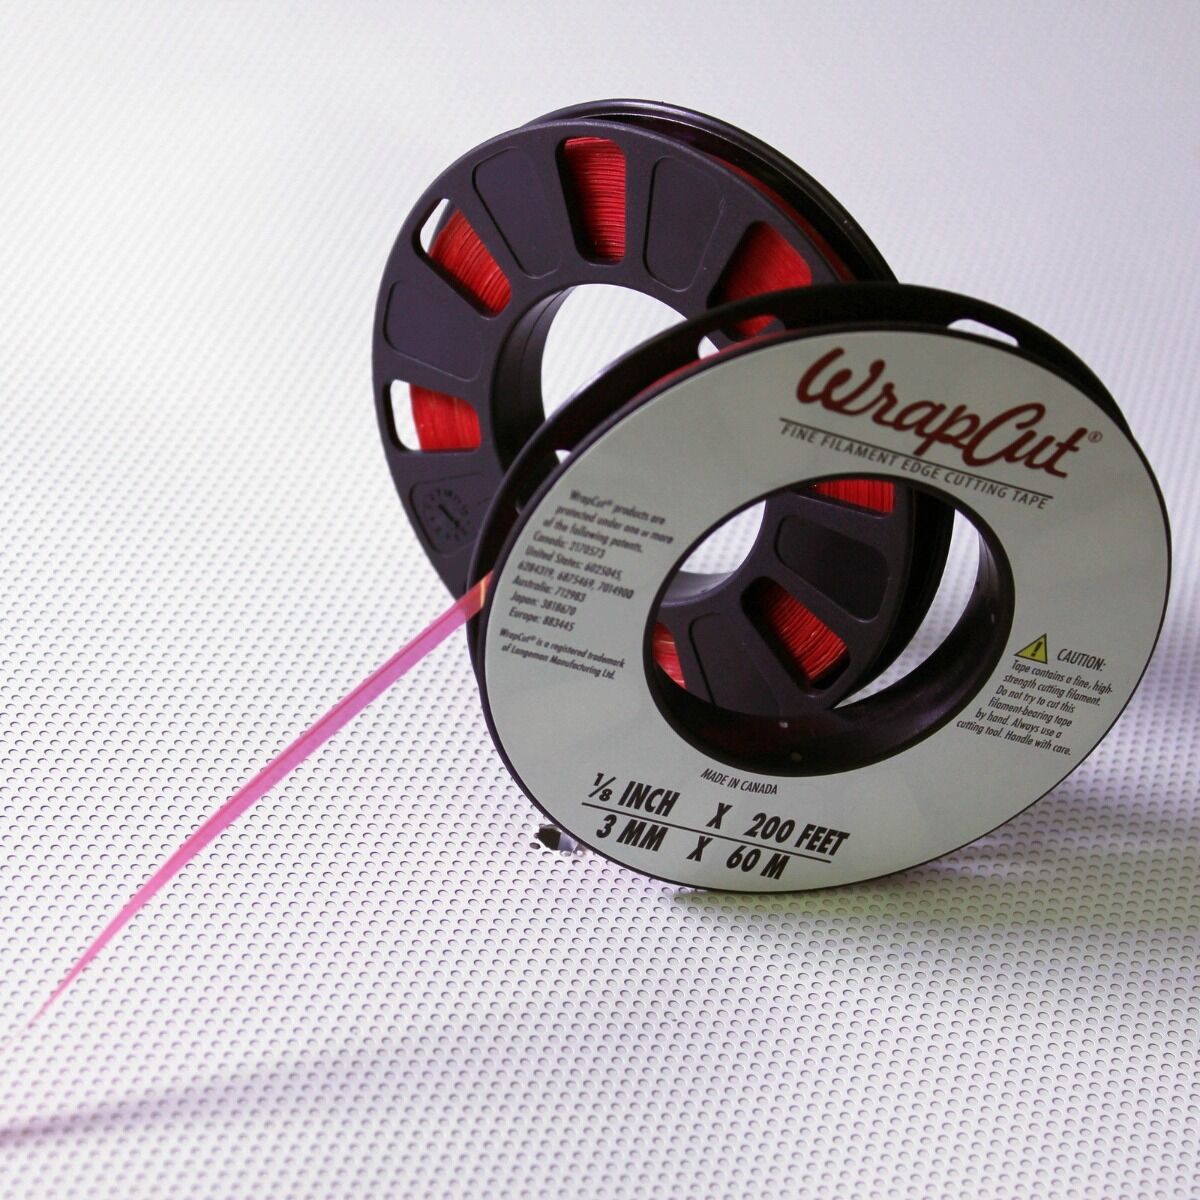 Cutting tape for car wrap vinyl 200ft professional grade